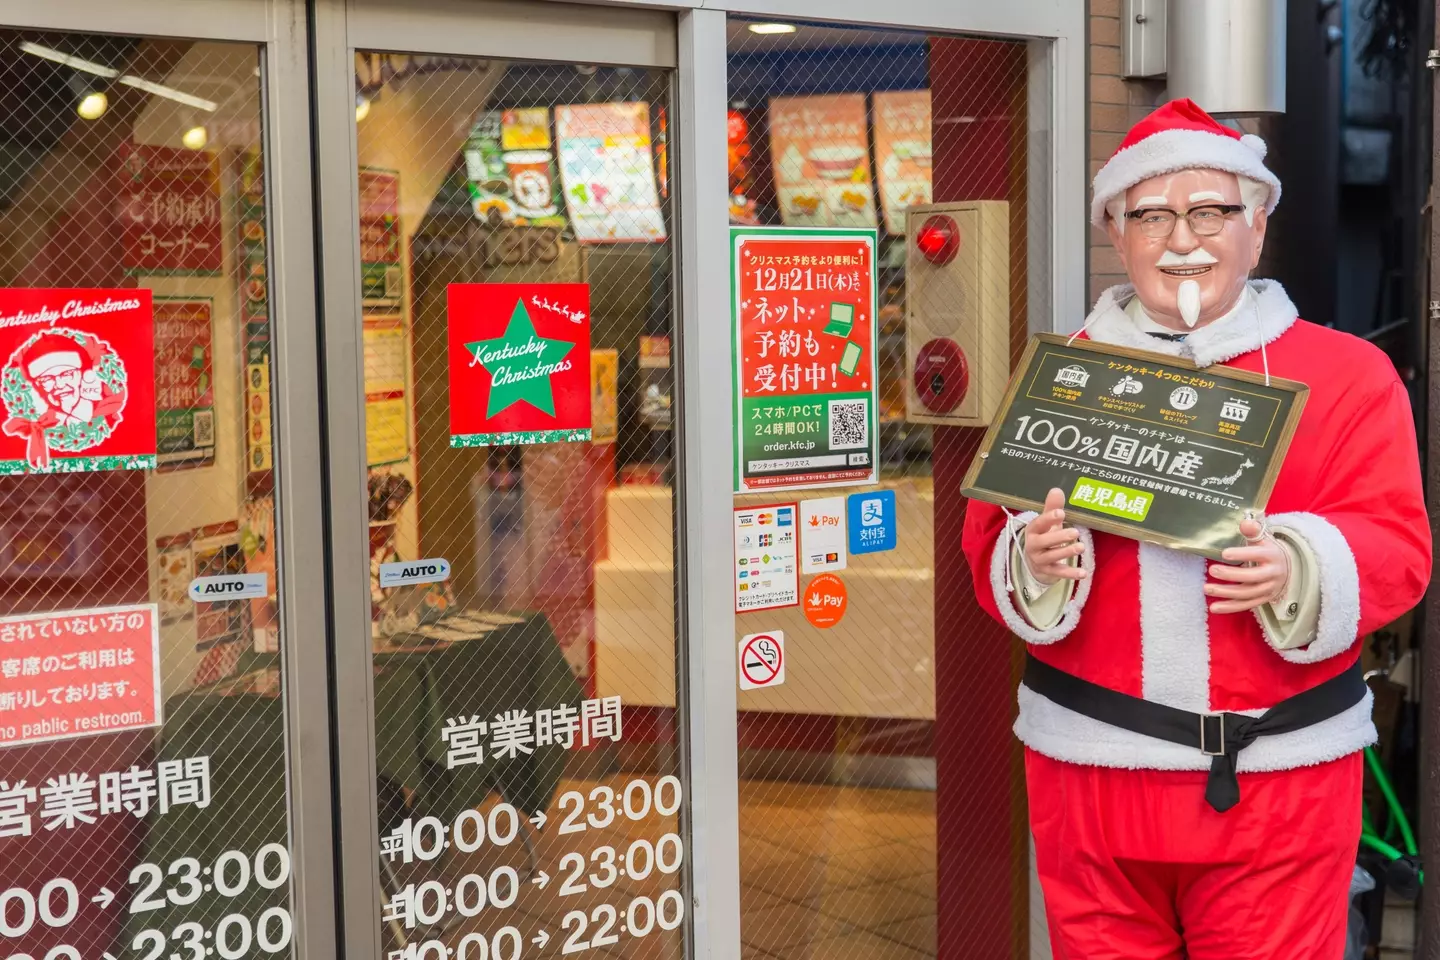 KFC for Christmas dinner has been a thing in Japan since the 1970s.